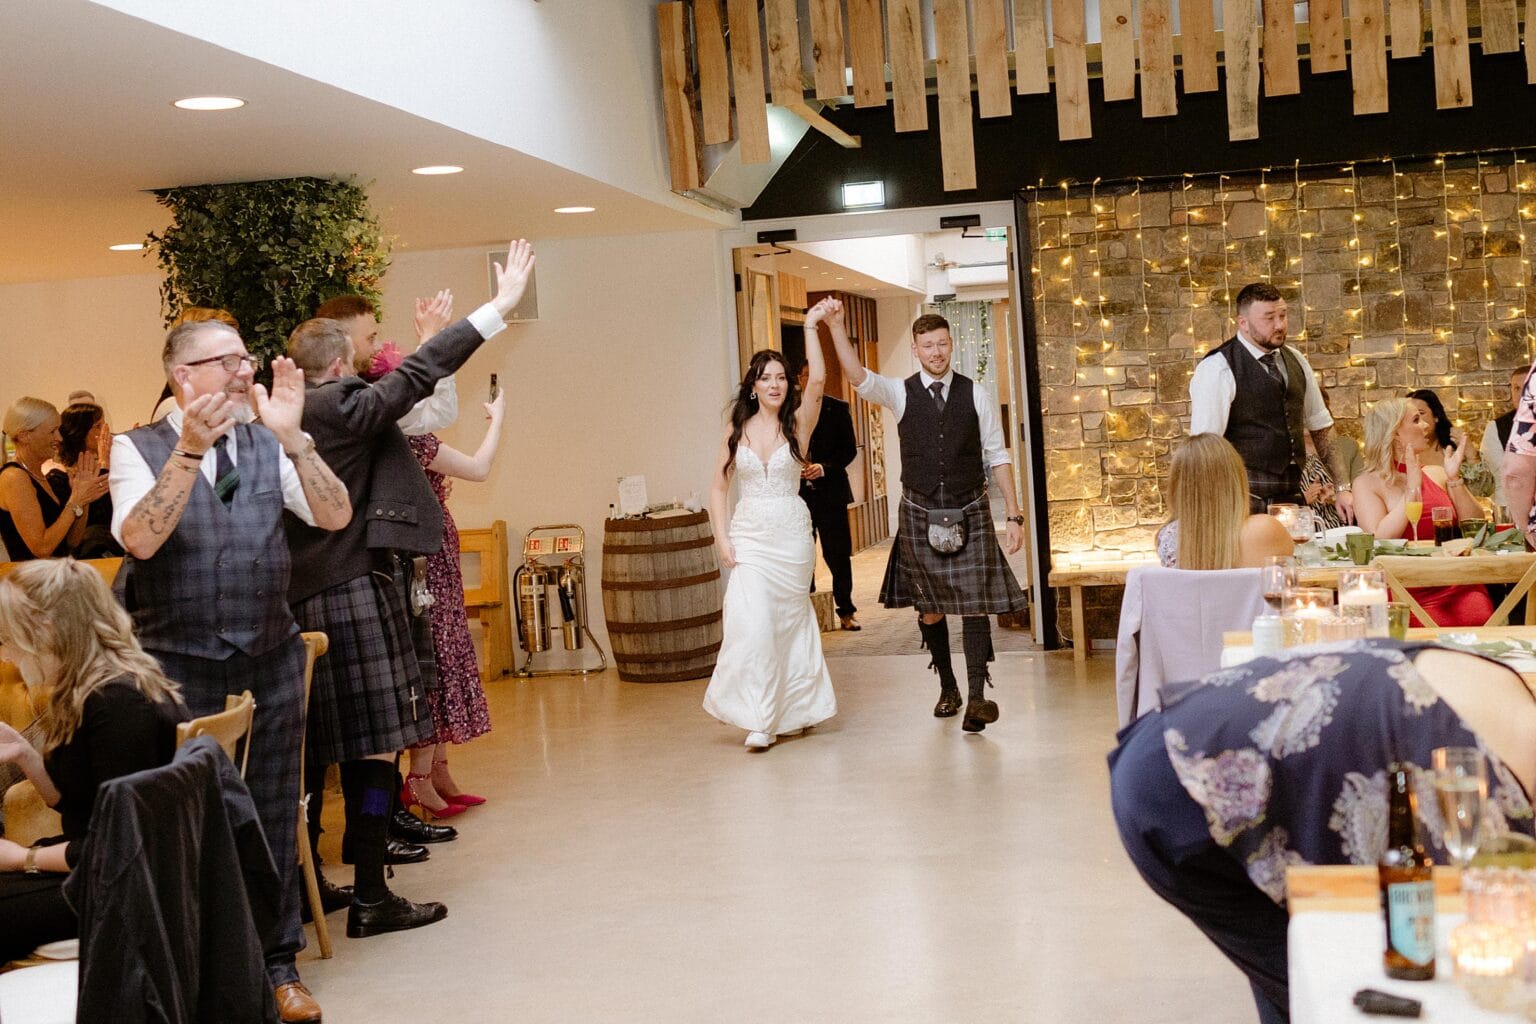 guests applaud as the bride and groom arrive for their wedding dinner at their barn wedding venues west lothian wooden paneling and strings of fairy lights are visible in the background